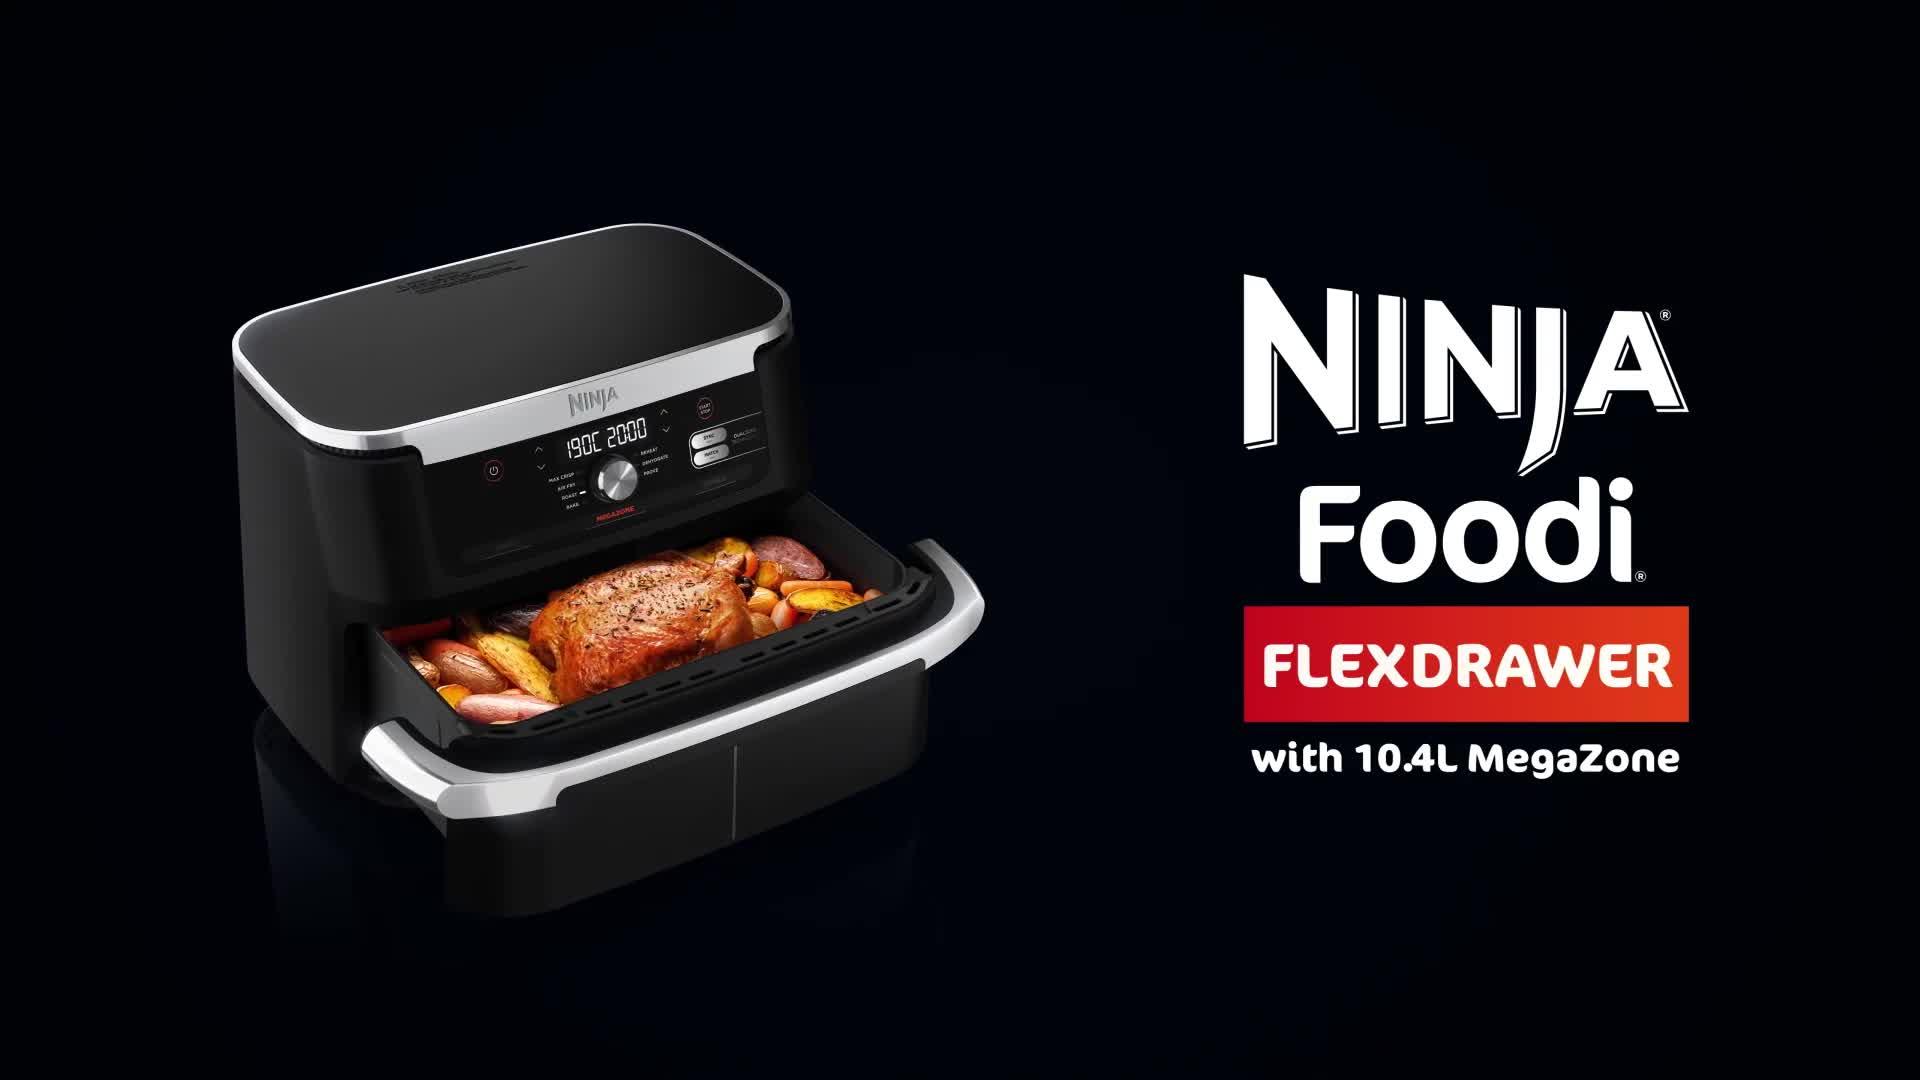 Ninja's 5.5-Qt. air fryer is ready to feed the family at $120 (Reg. $170)